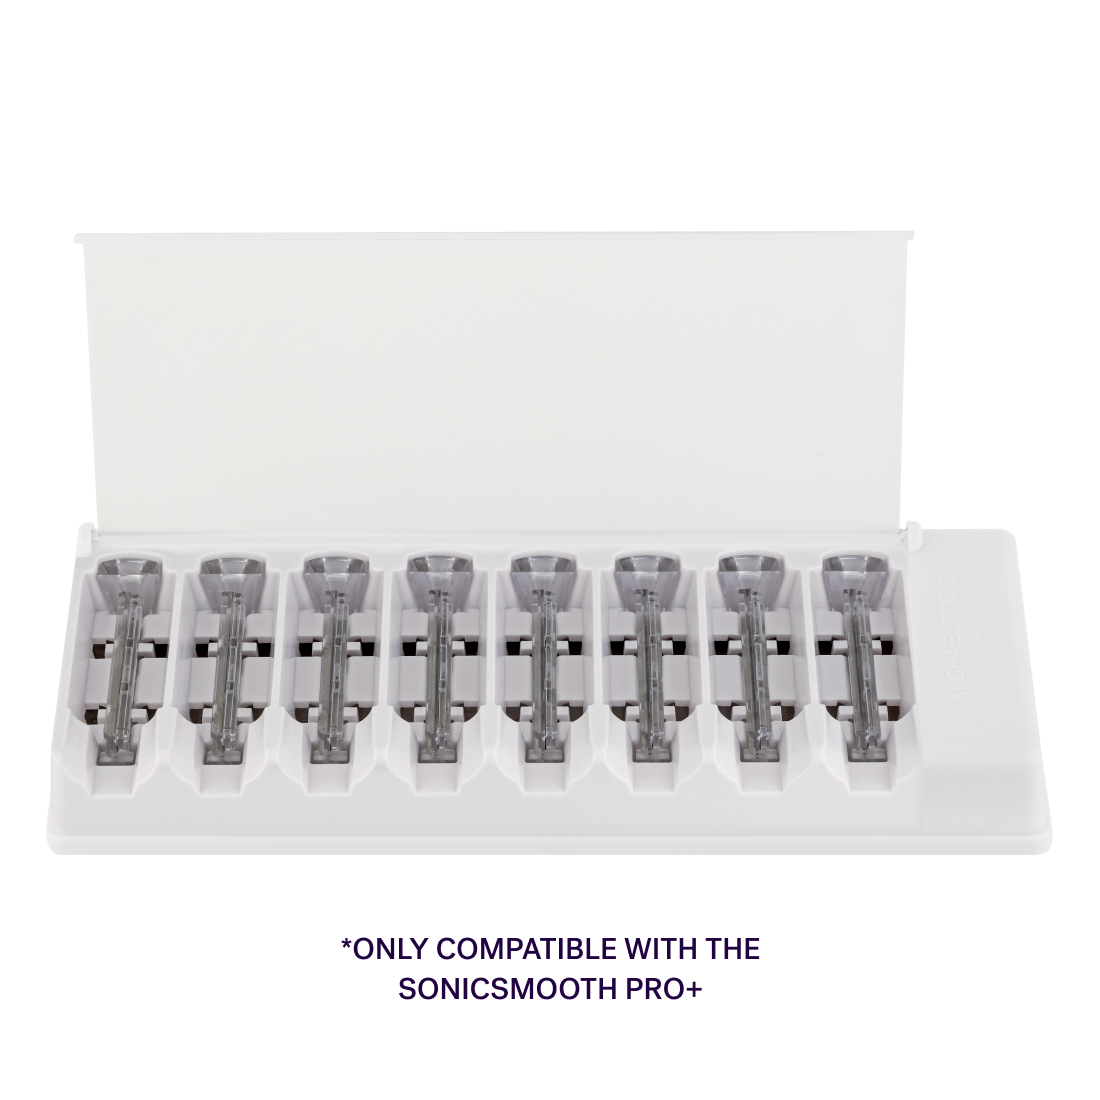 A white tray holds eight grey Sonicsmooth Pro+ Clear Refill Tips from Michael Todd Beauty, lined up in individual slots. Text below reads, "Only compatible with the Sonicsmooth Pro+ and includes Single-Use Safety Tips.